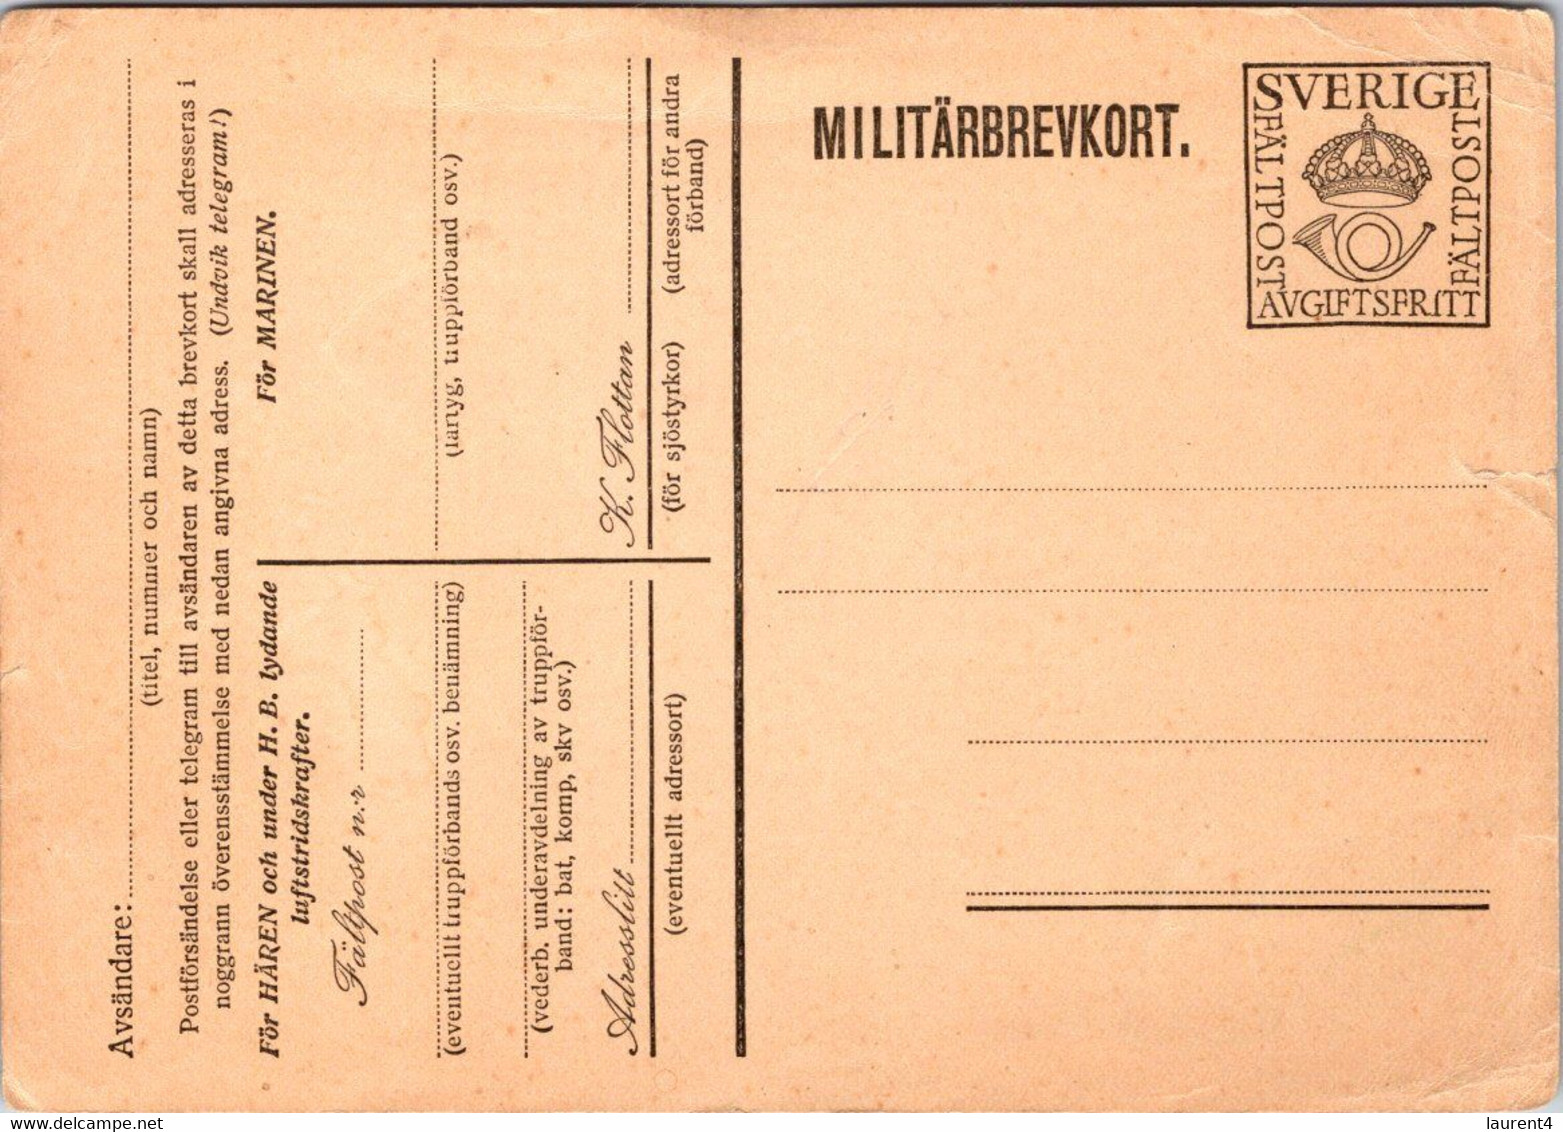 (3 C 10) Sweden - Not Posted - Military Pre-Paid Postcard (2 Items) - Military